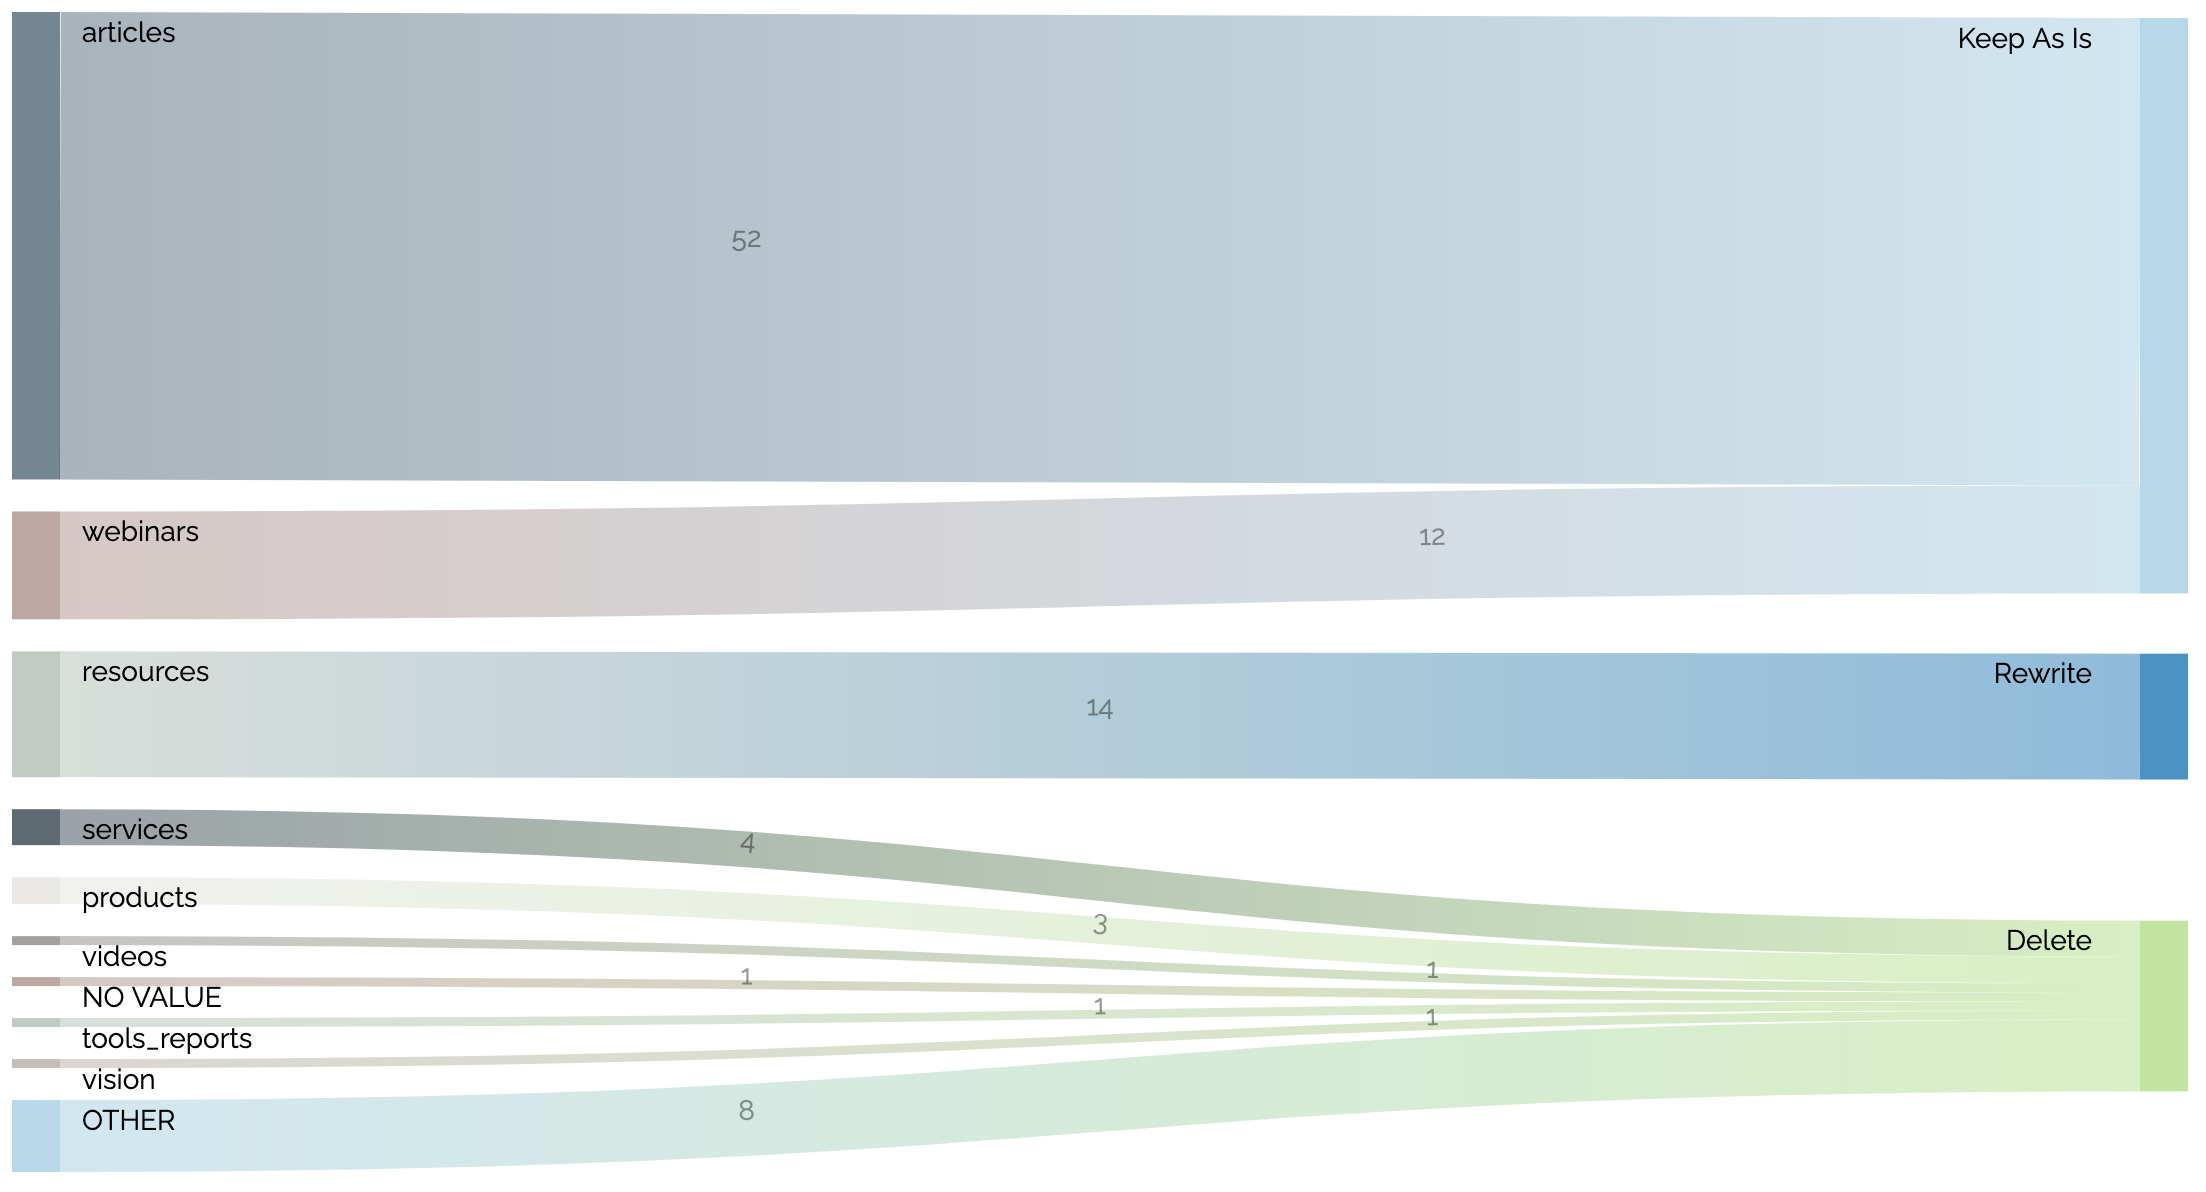 Sankey diagram in Content Chimera, showing what treatment content is going to get.